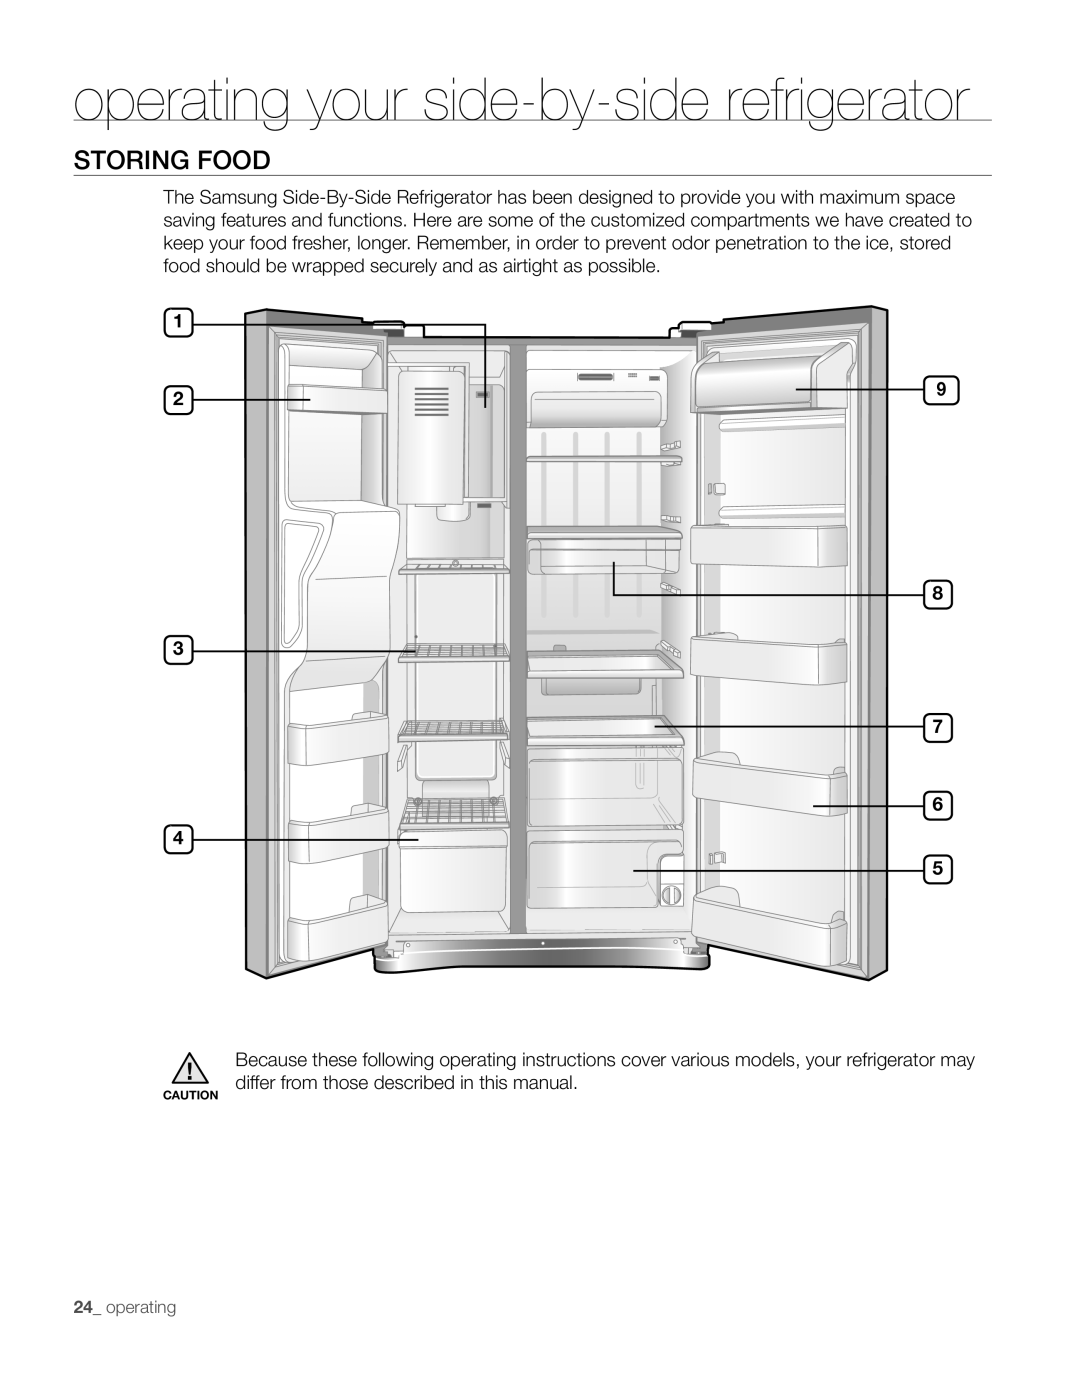 Samsung RS267TDBP user manual Storing food, operating your side-by-side refrigerator 